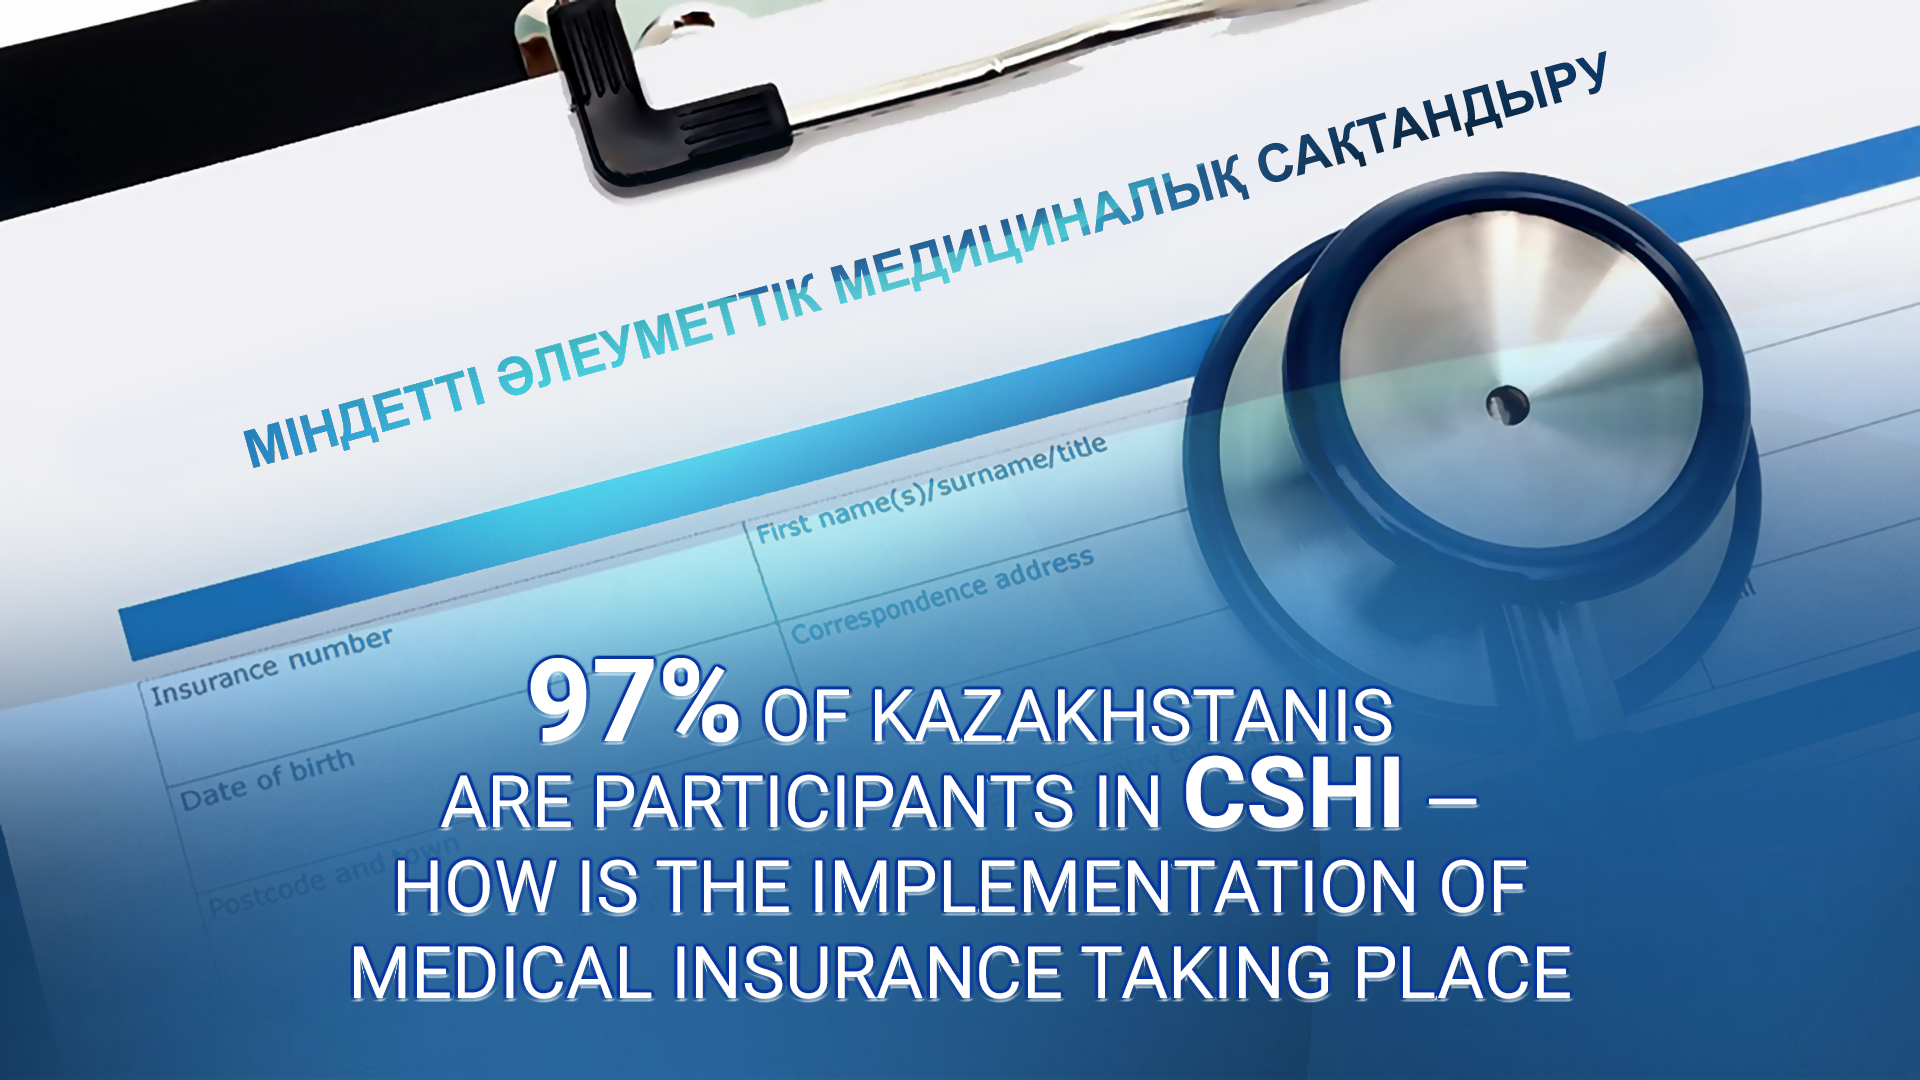 How is the implementation of medical insurance taking place?